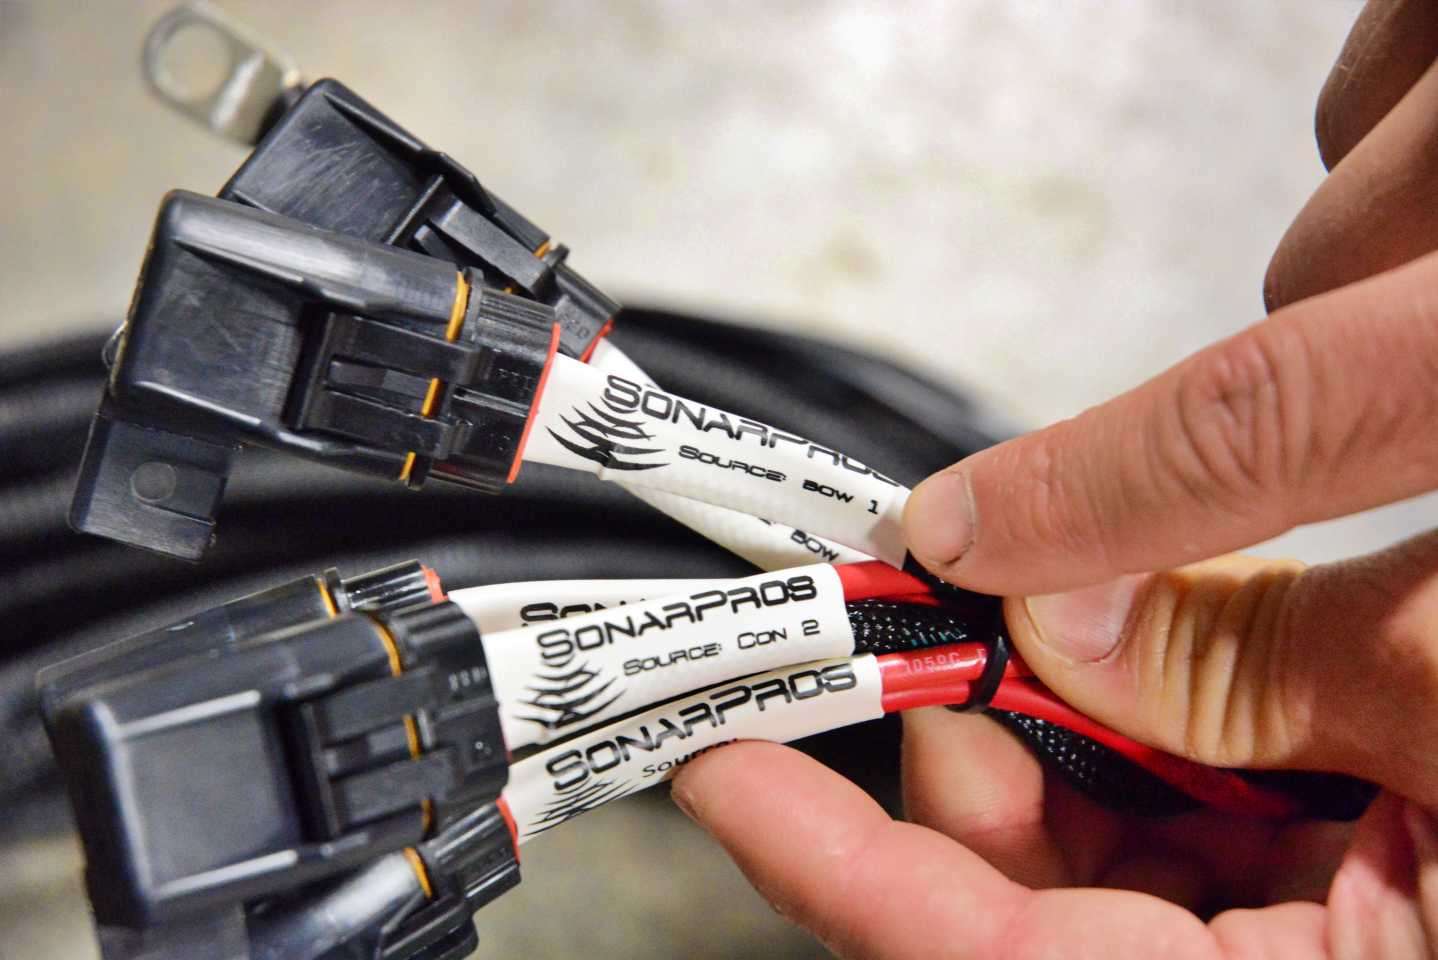 The custom-made harness has a dedicated cable for each of unit. Each plug is labeled to identify its connection location. Note the âBow 1â and âConsole 2â labels.  
